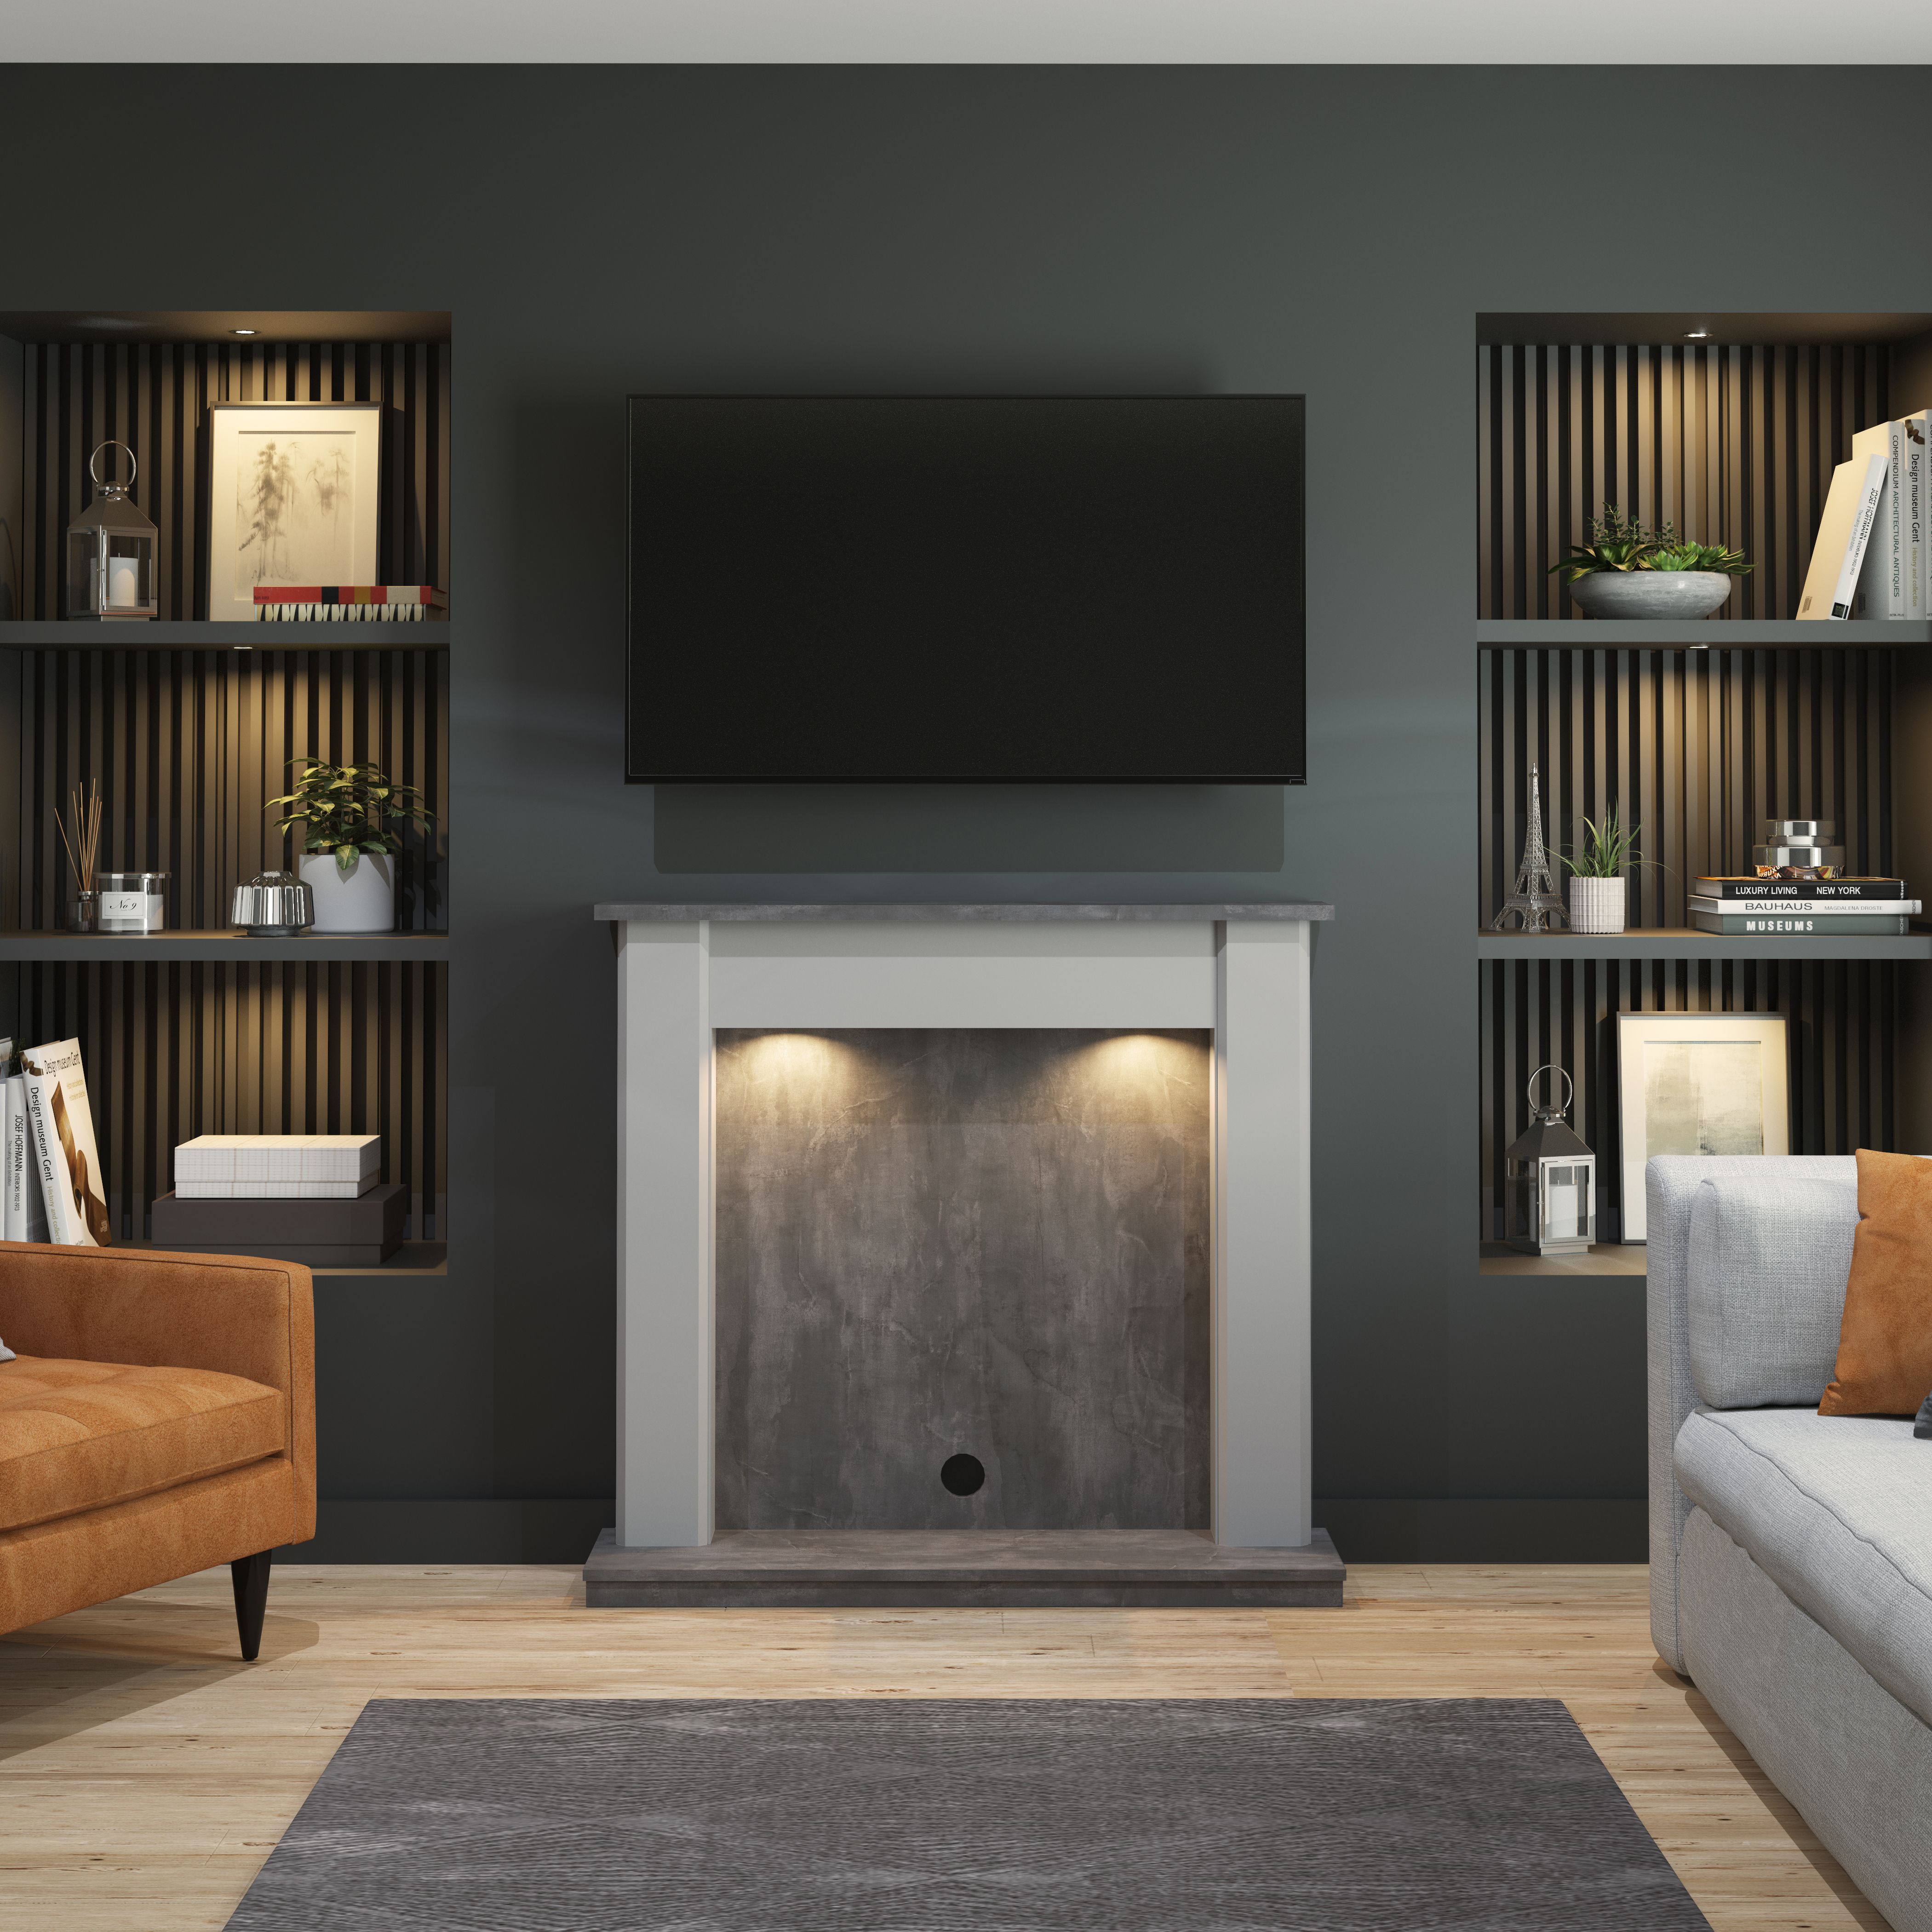 Be Modern Emmbrook Grey & Slate effect Fire surround set with Lights included